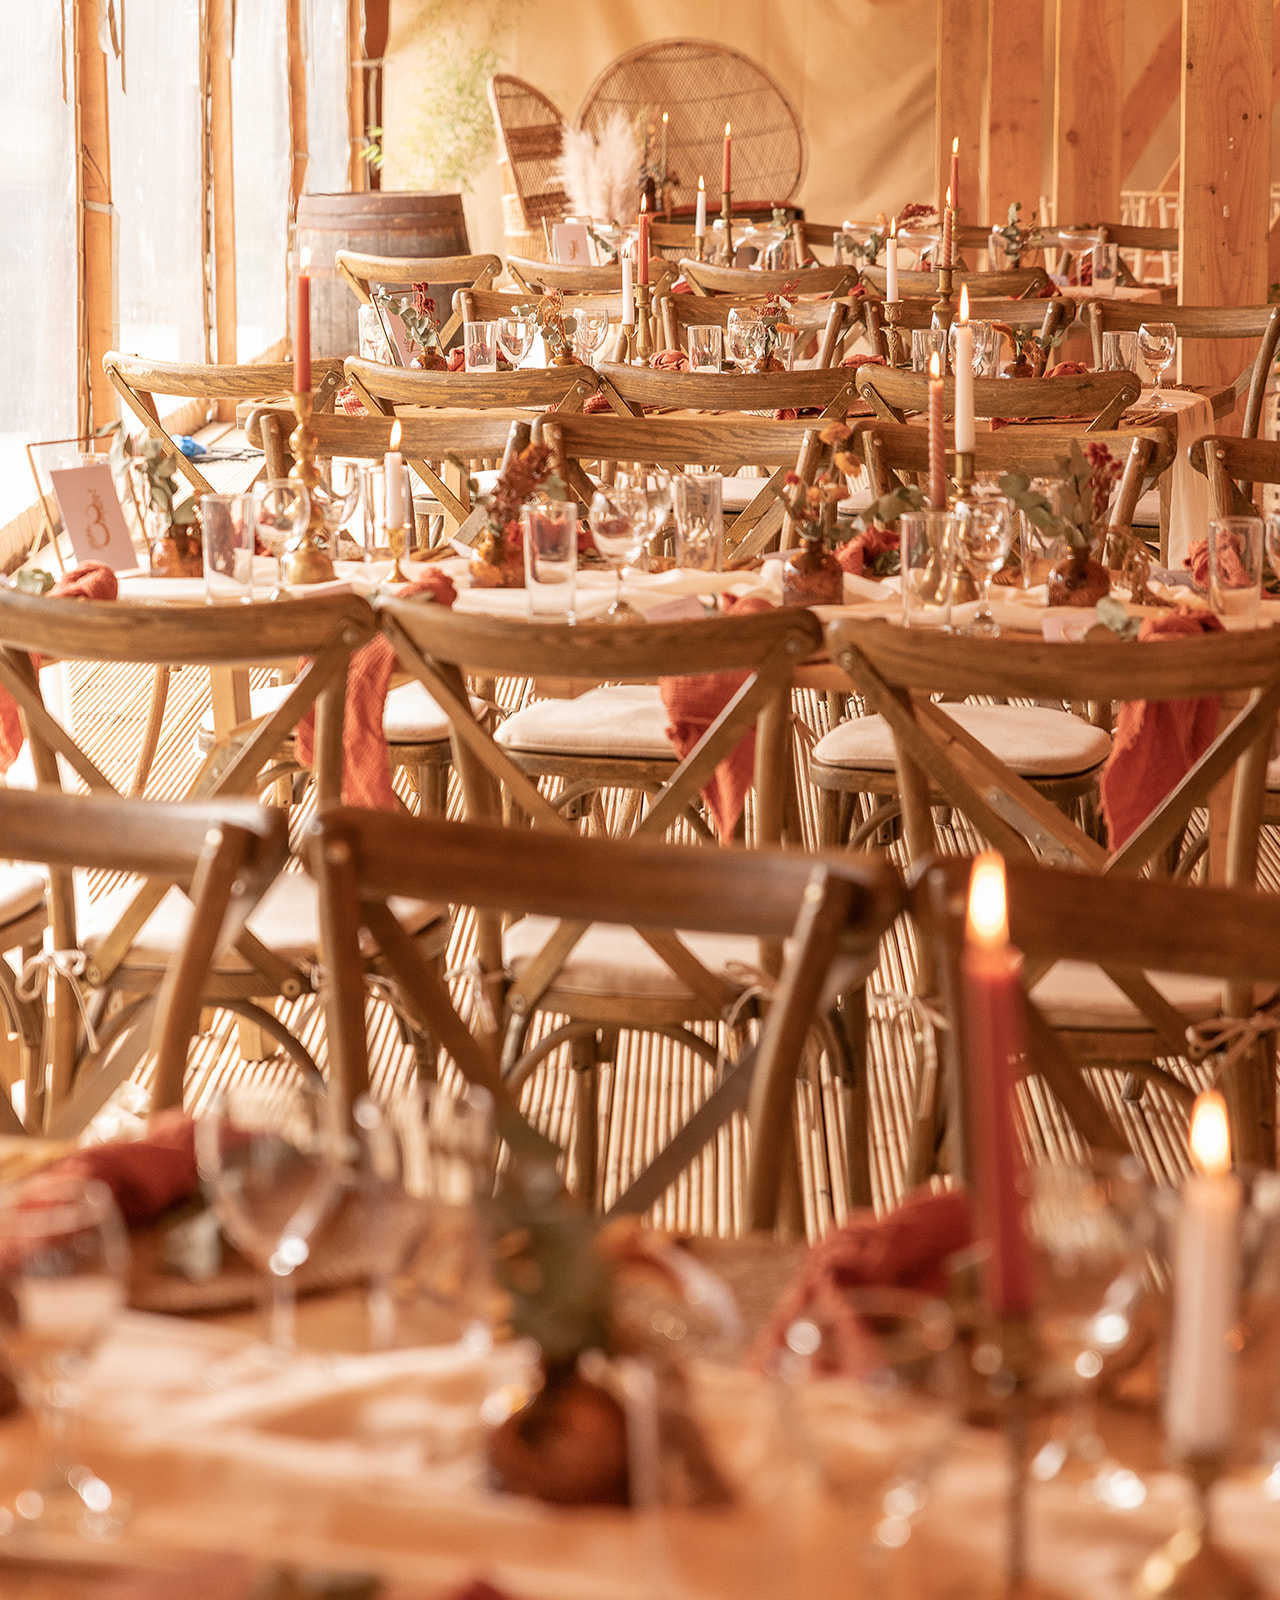 Wedding tables set up in Lemur Lodge IMAGE: Compass 2023